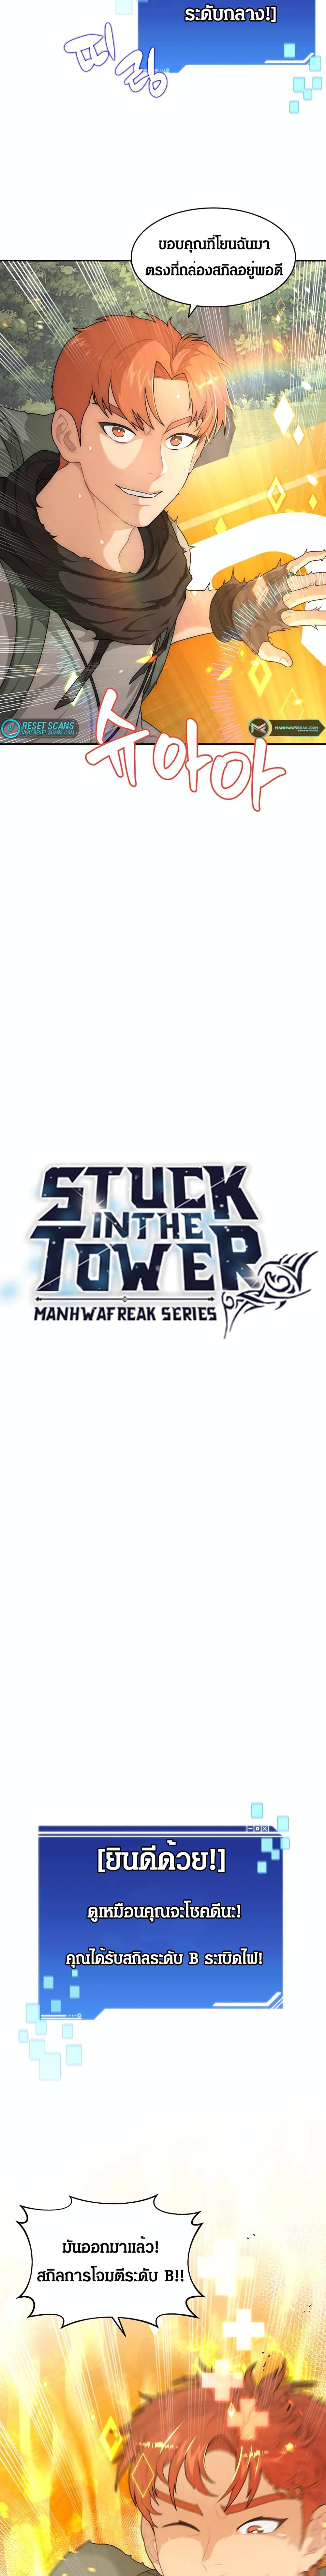 Stuck in the Tower 5-5